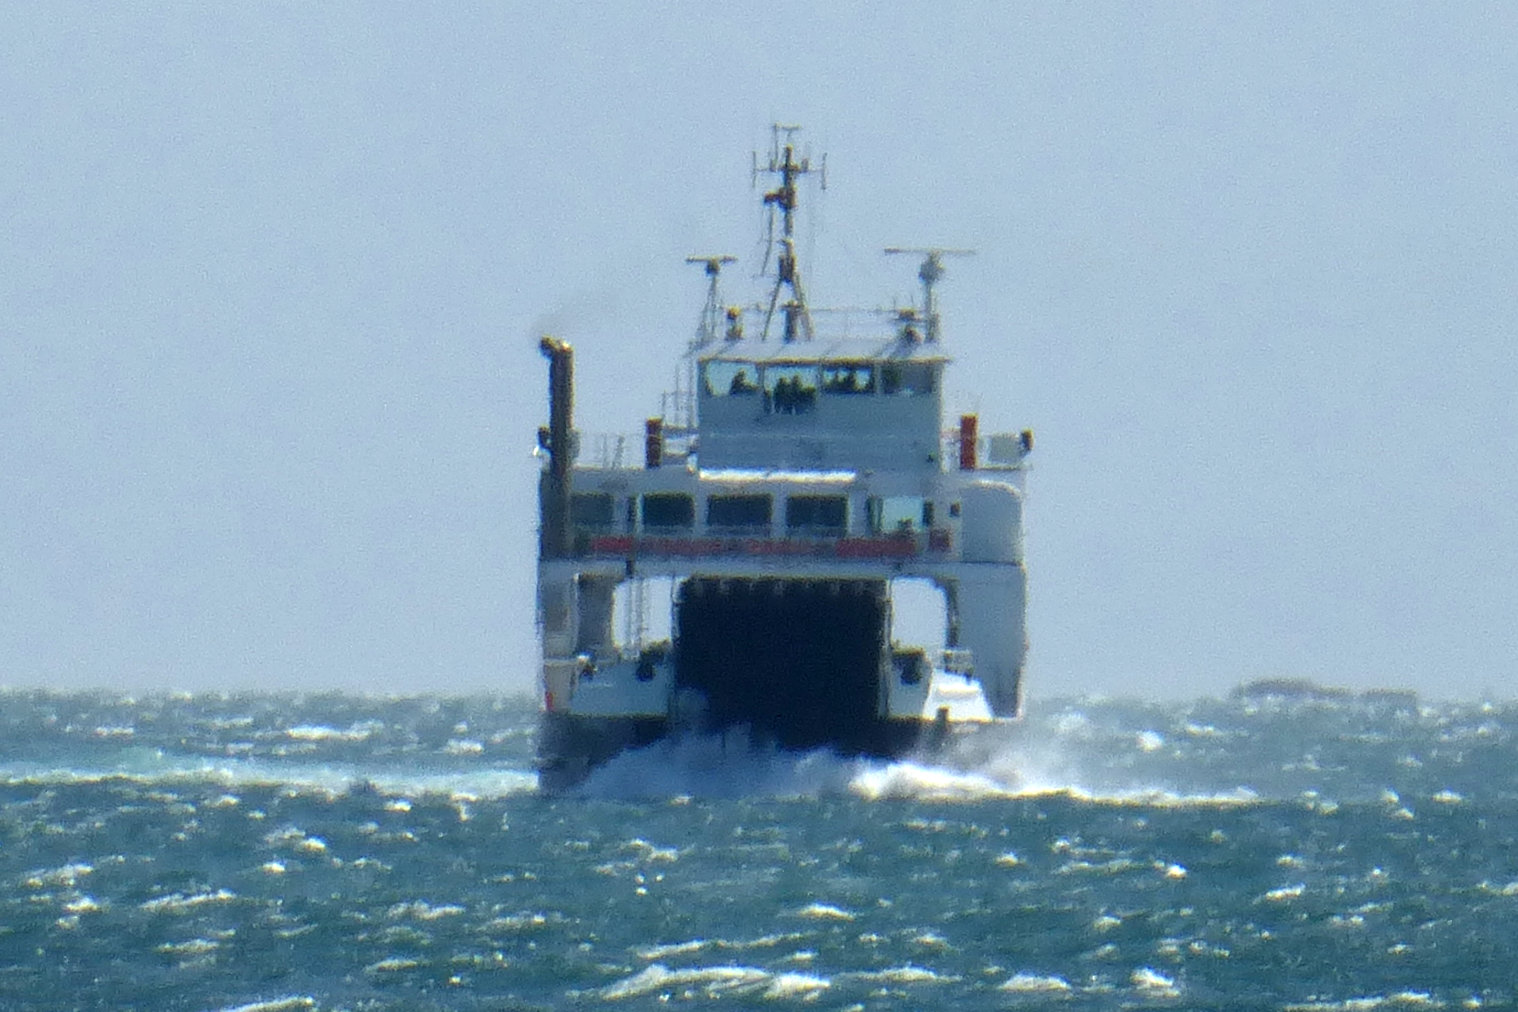 The modern ferry butts through a brisk sea between Harris and North Uist*